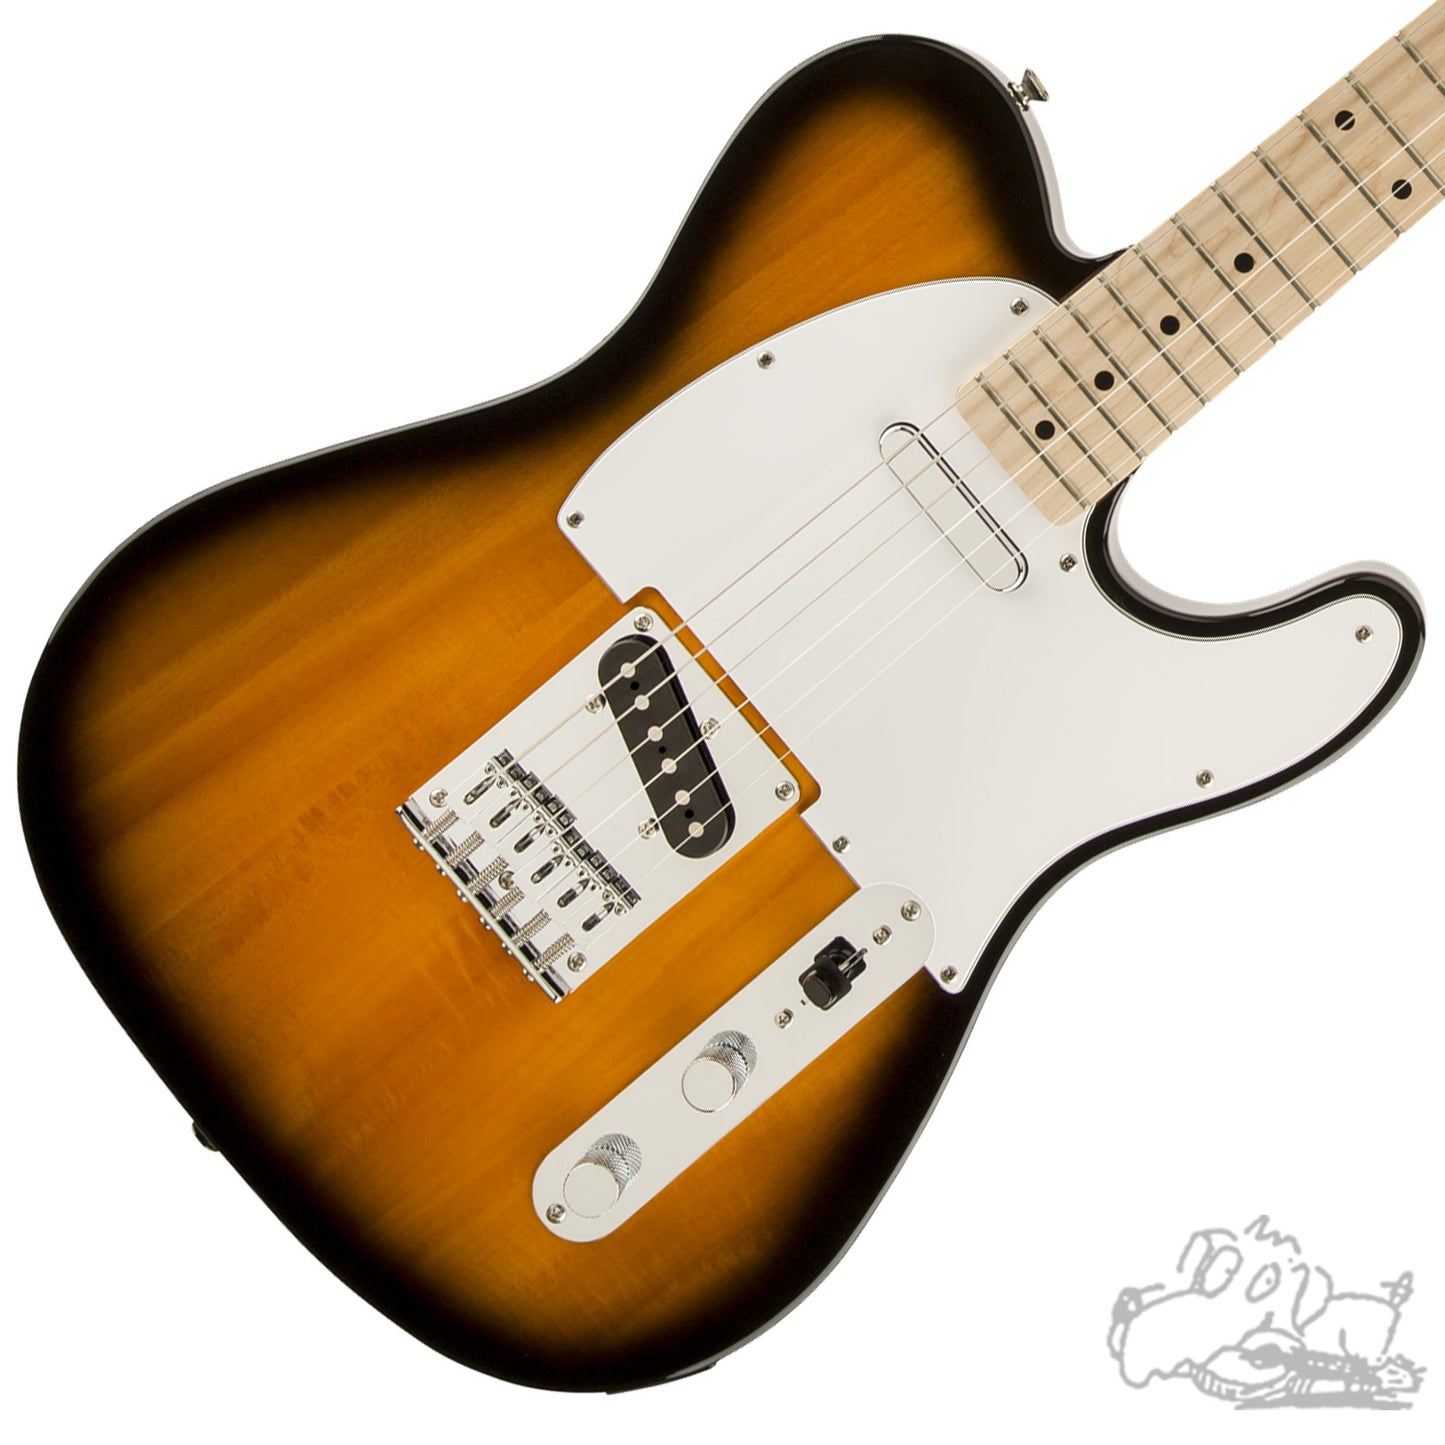 Squier Affinity Telecaster Electric Guitars in Assorted Colors